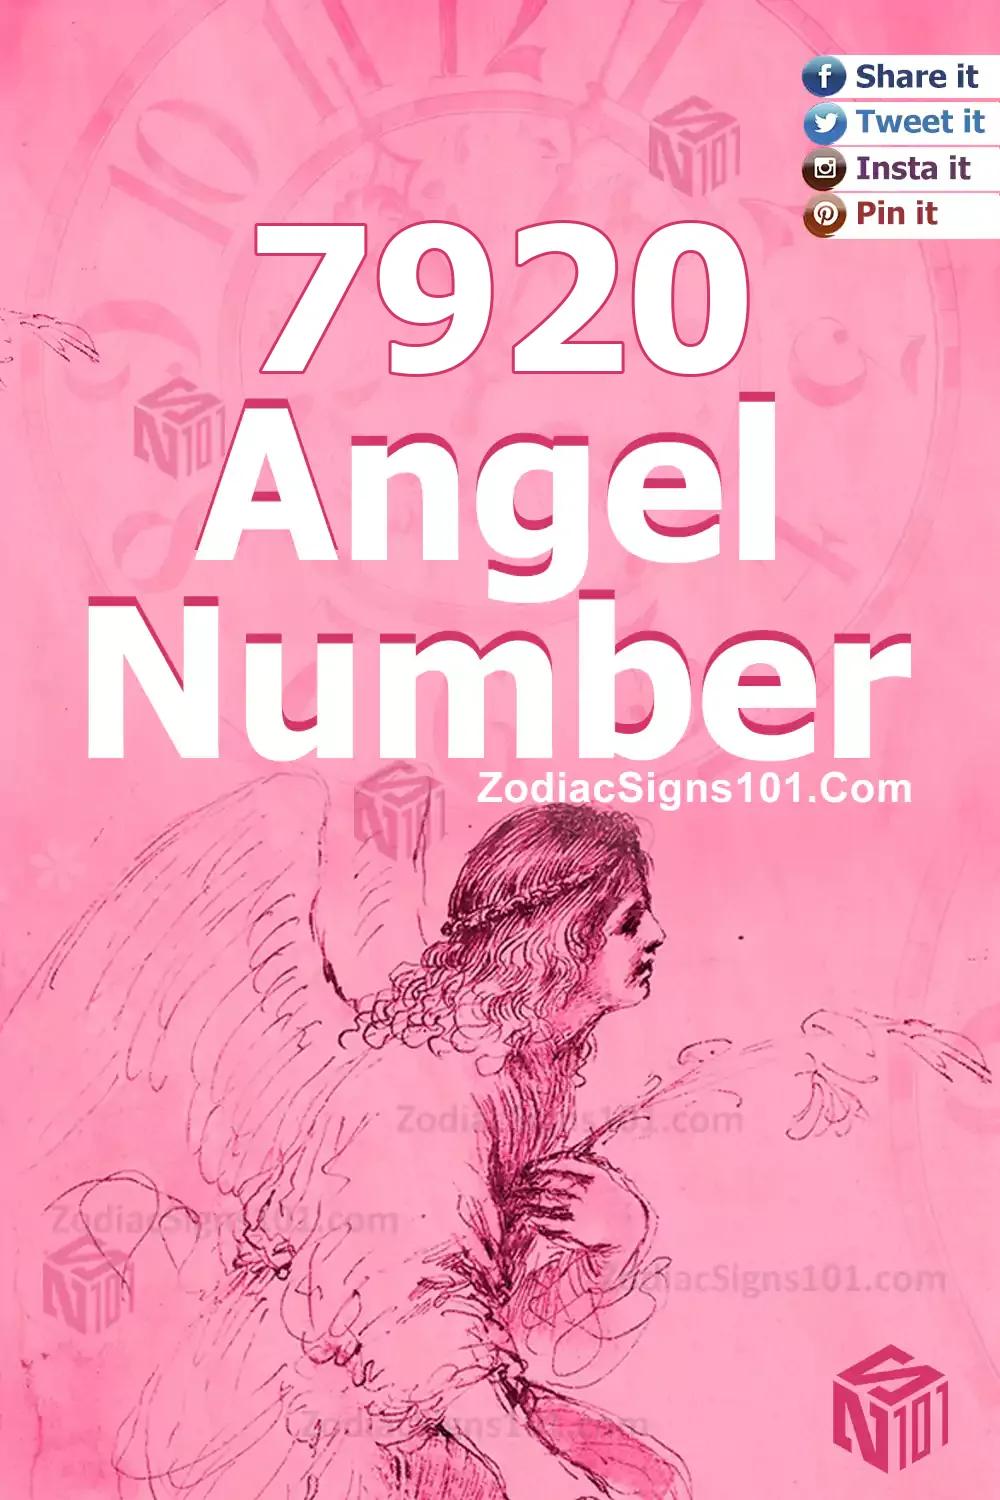 7920 Angel Number Meaning